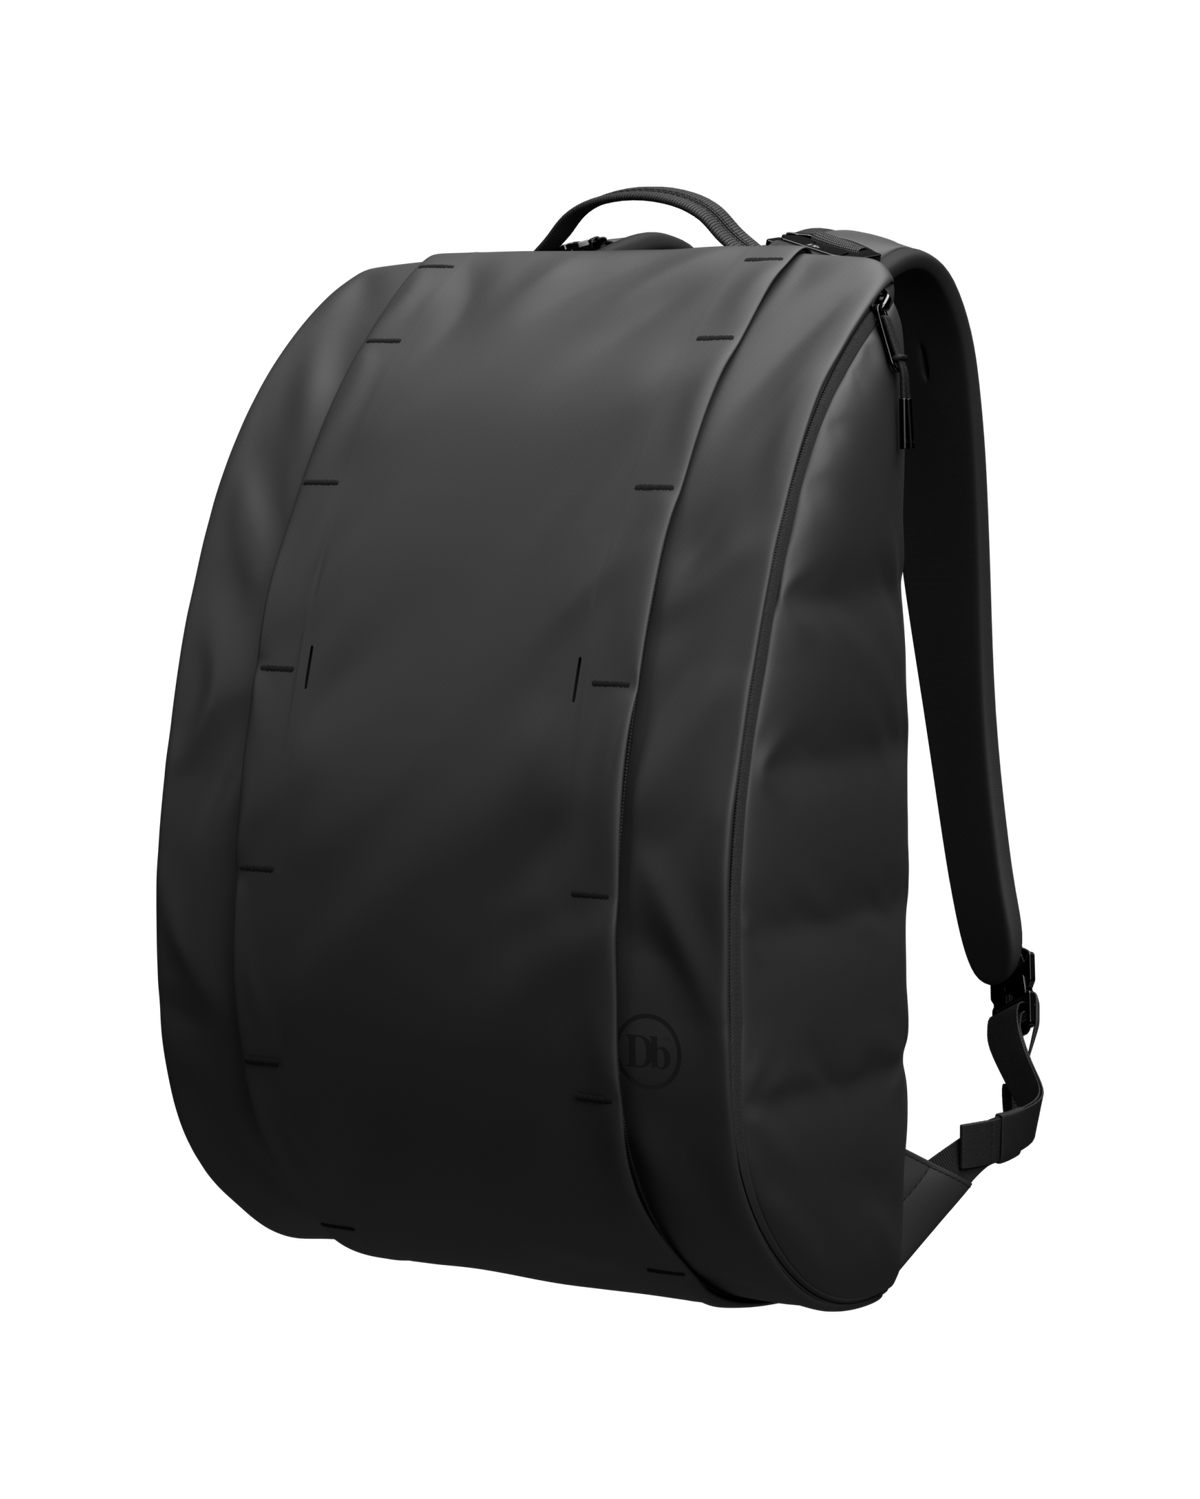 TheVinge15LBackpack.png